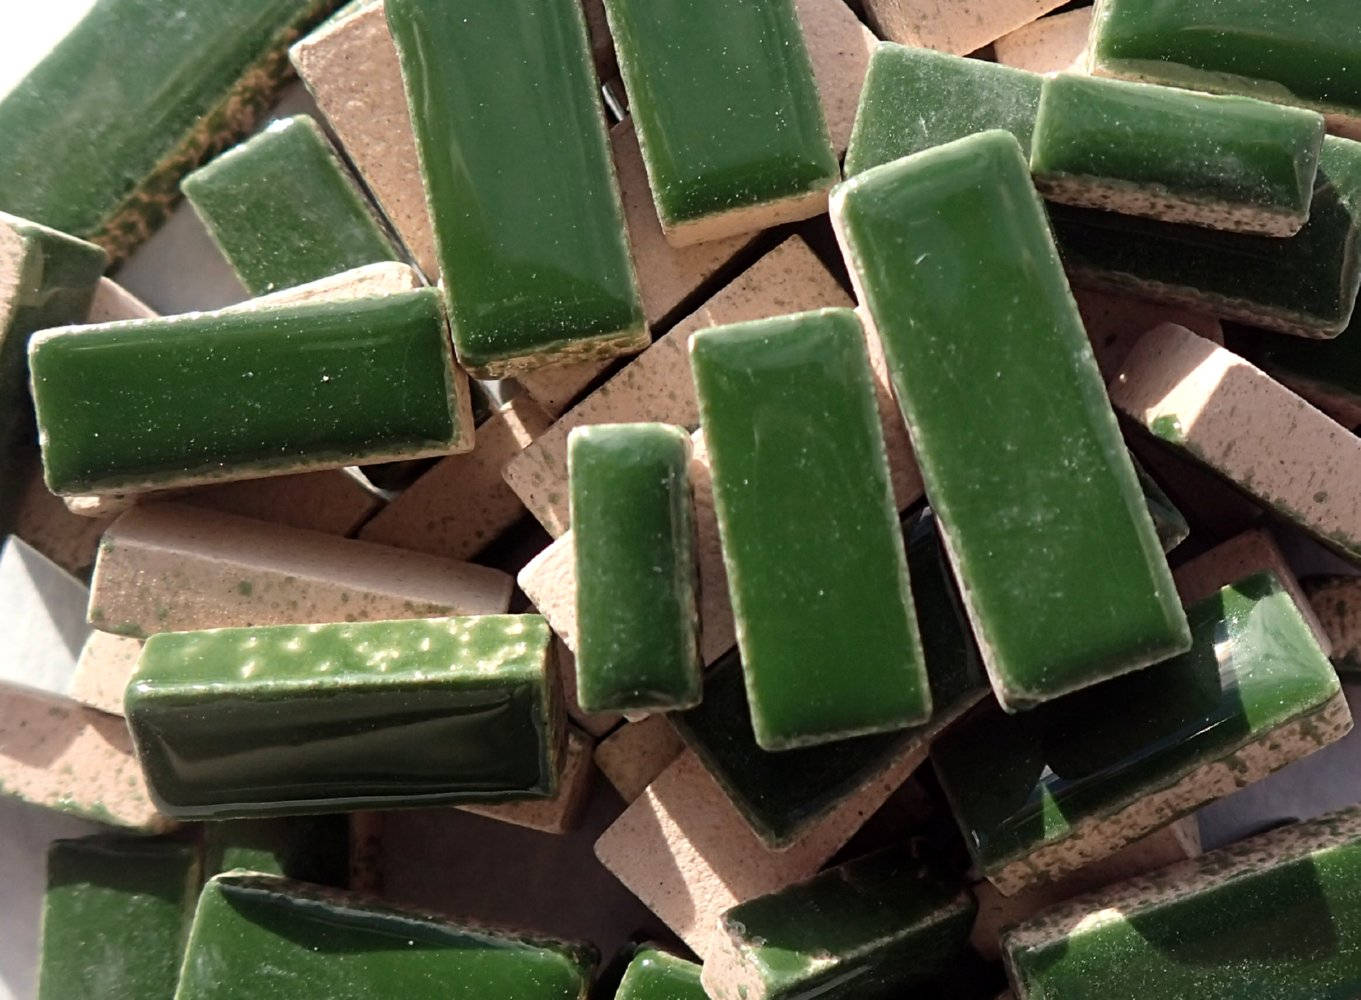 Deep Green Mini Rectangles Mosaic Tiles - 50g Ceramic in Mix of 3 Sizes 1/2" and 3/4" in Pesto